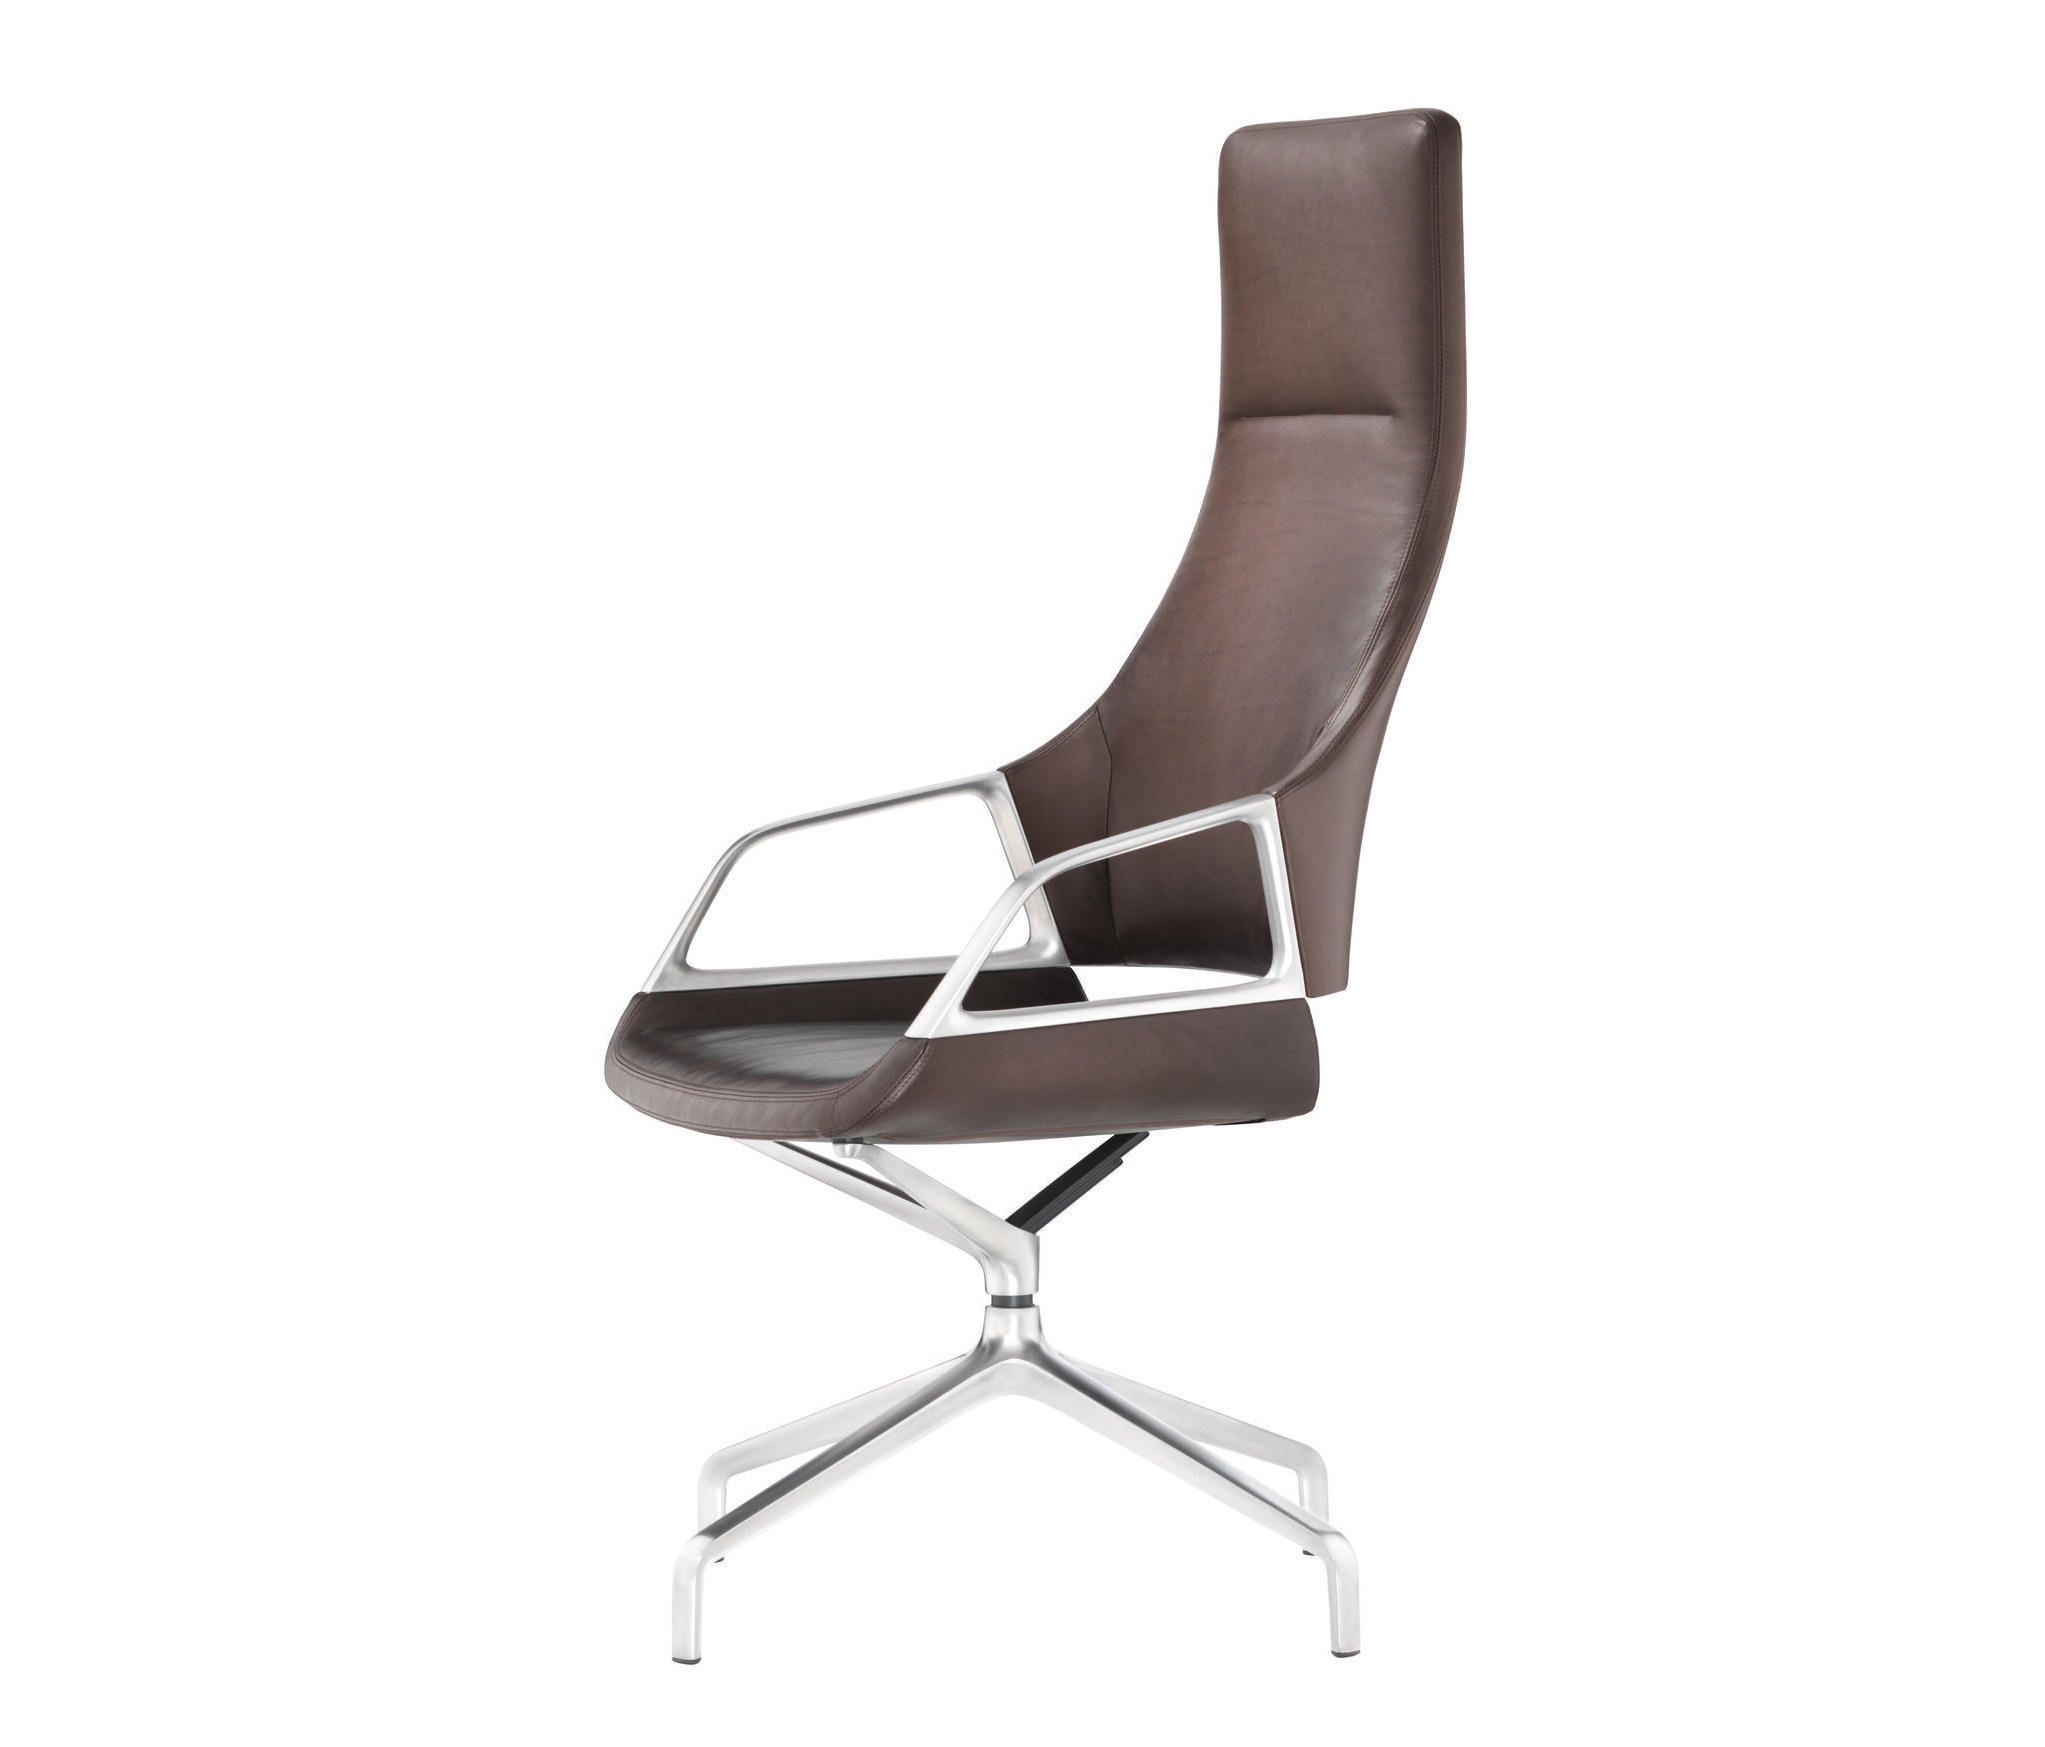 GRAPH - Chairs from Wilkhahn | Architonic